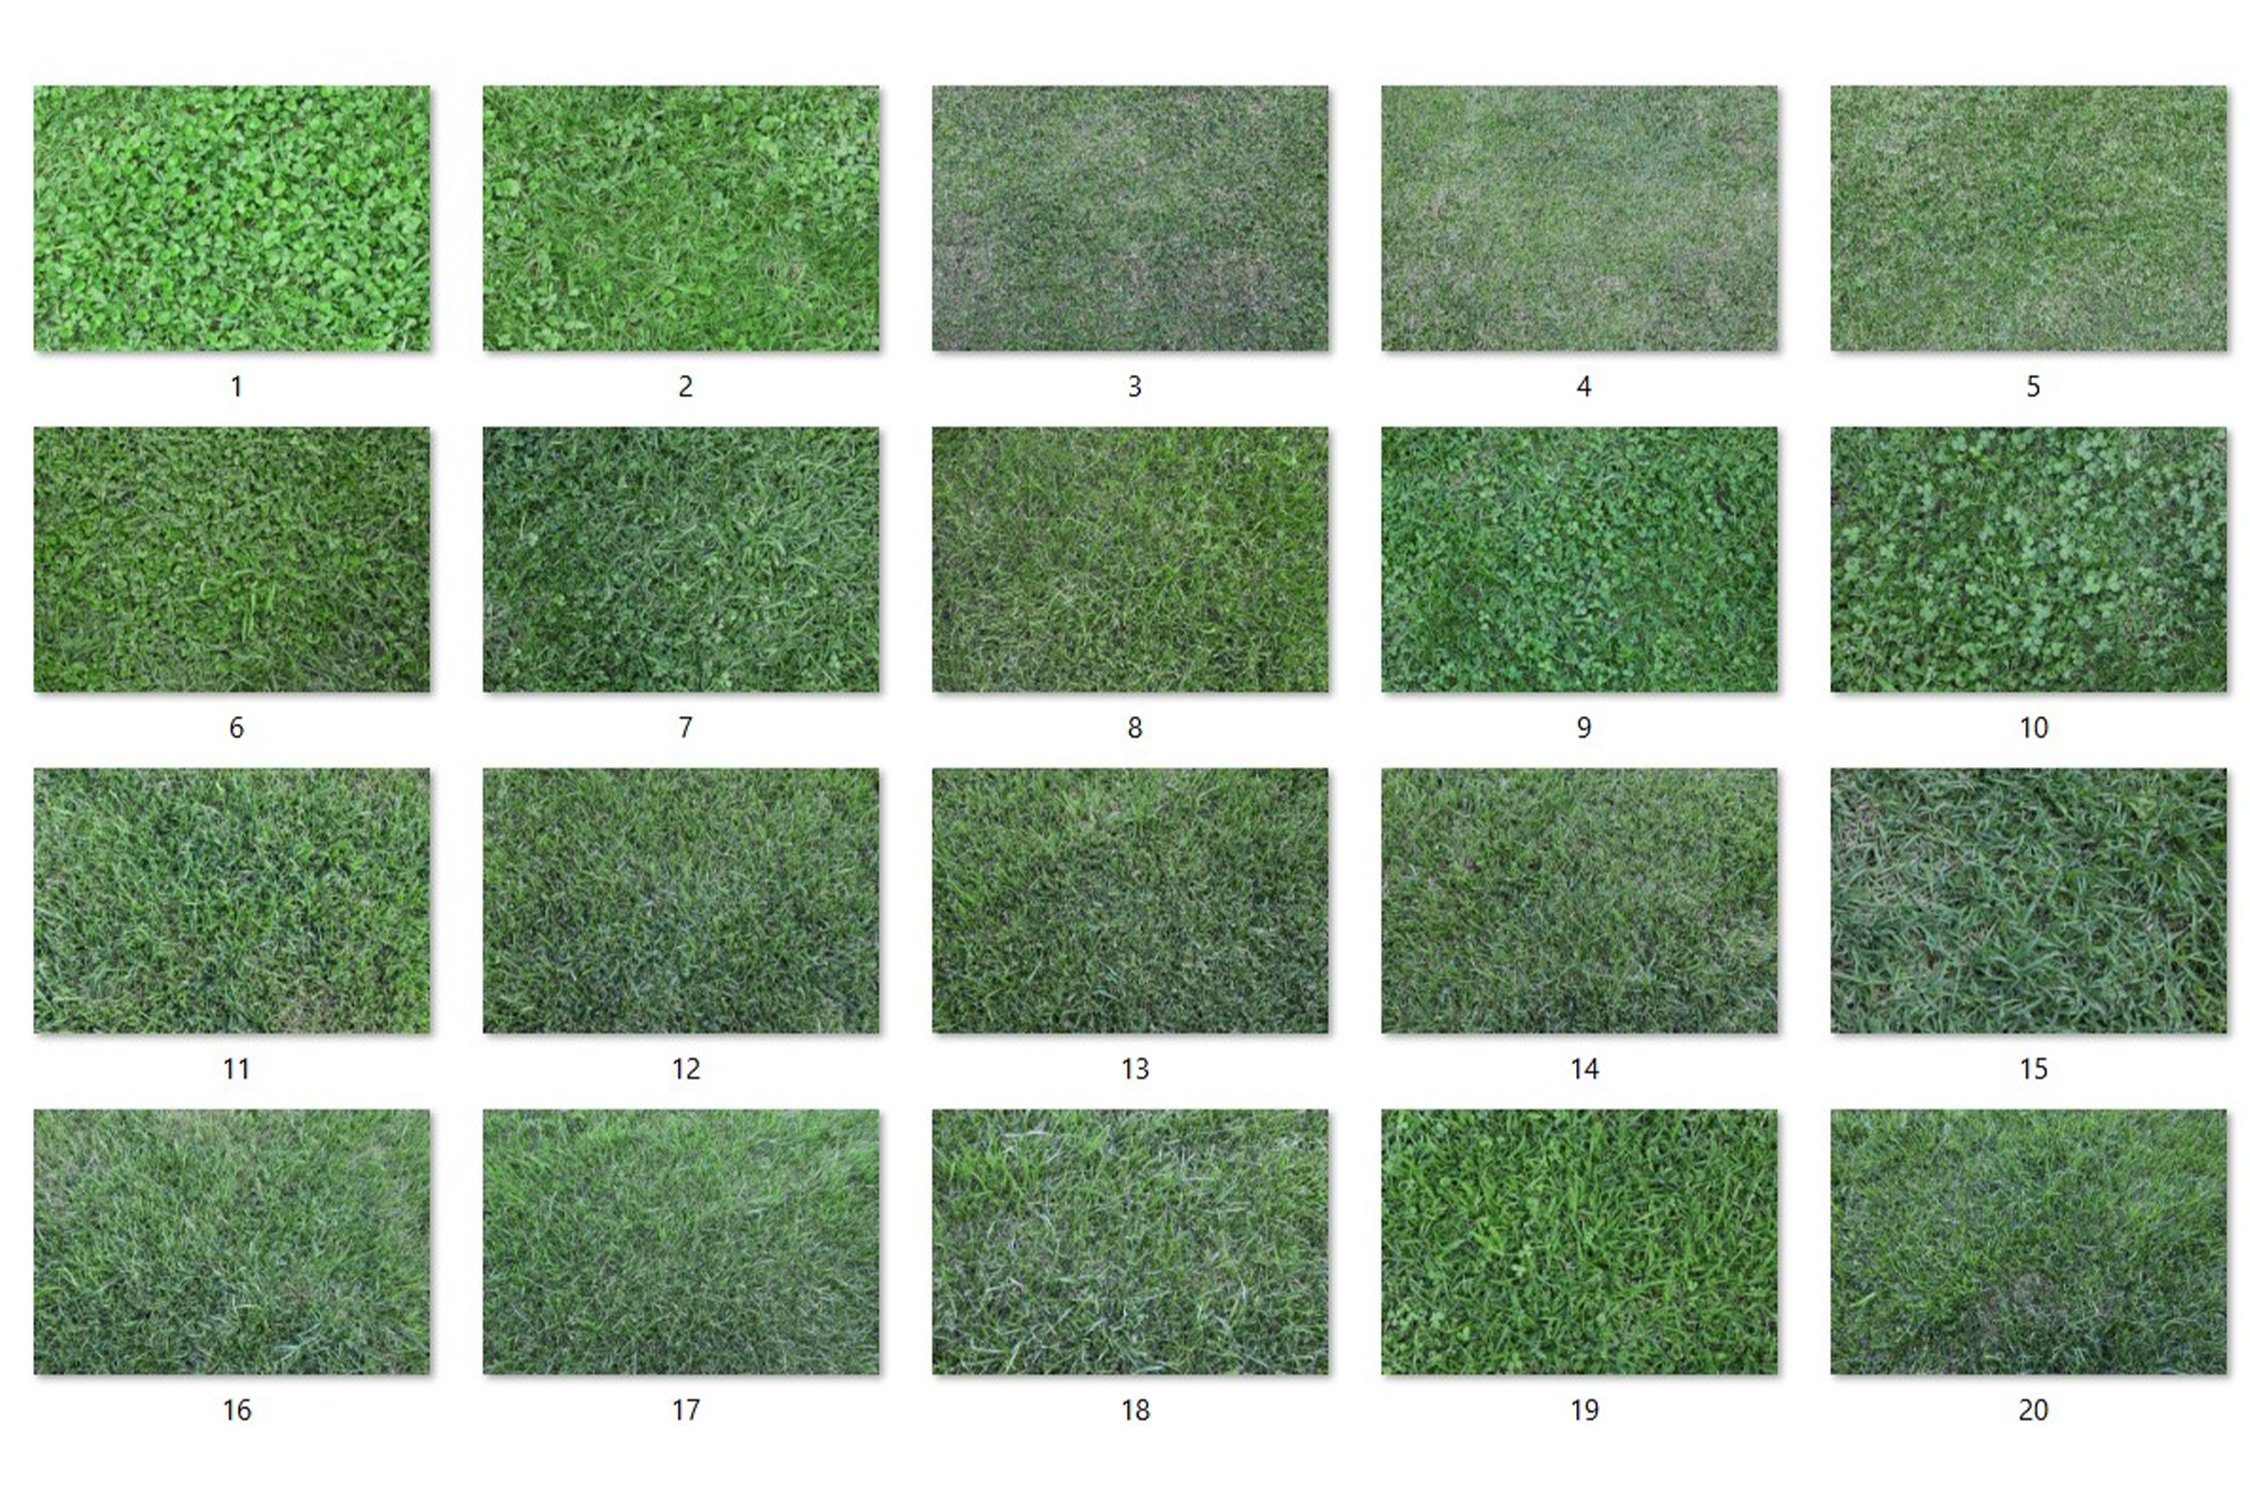 20 Grass Textures HQ preview image.